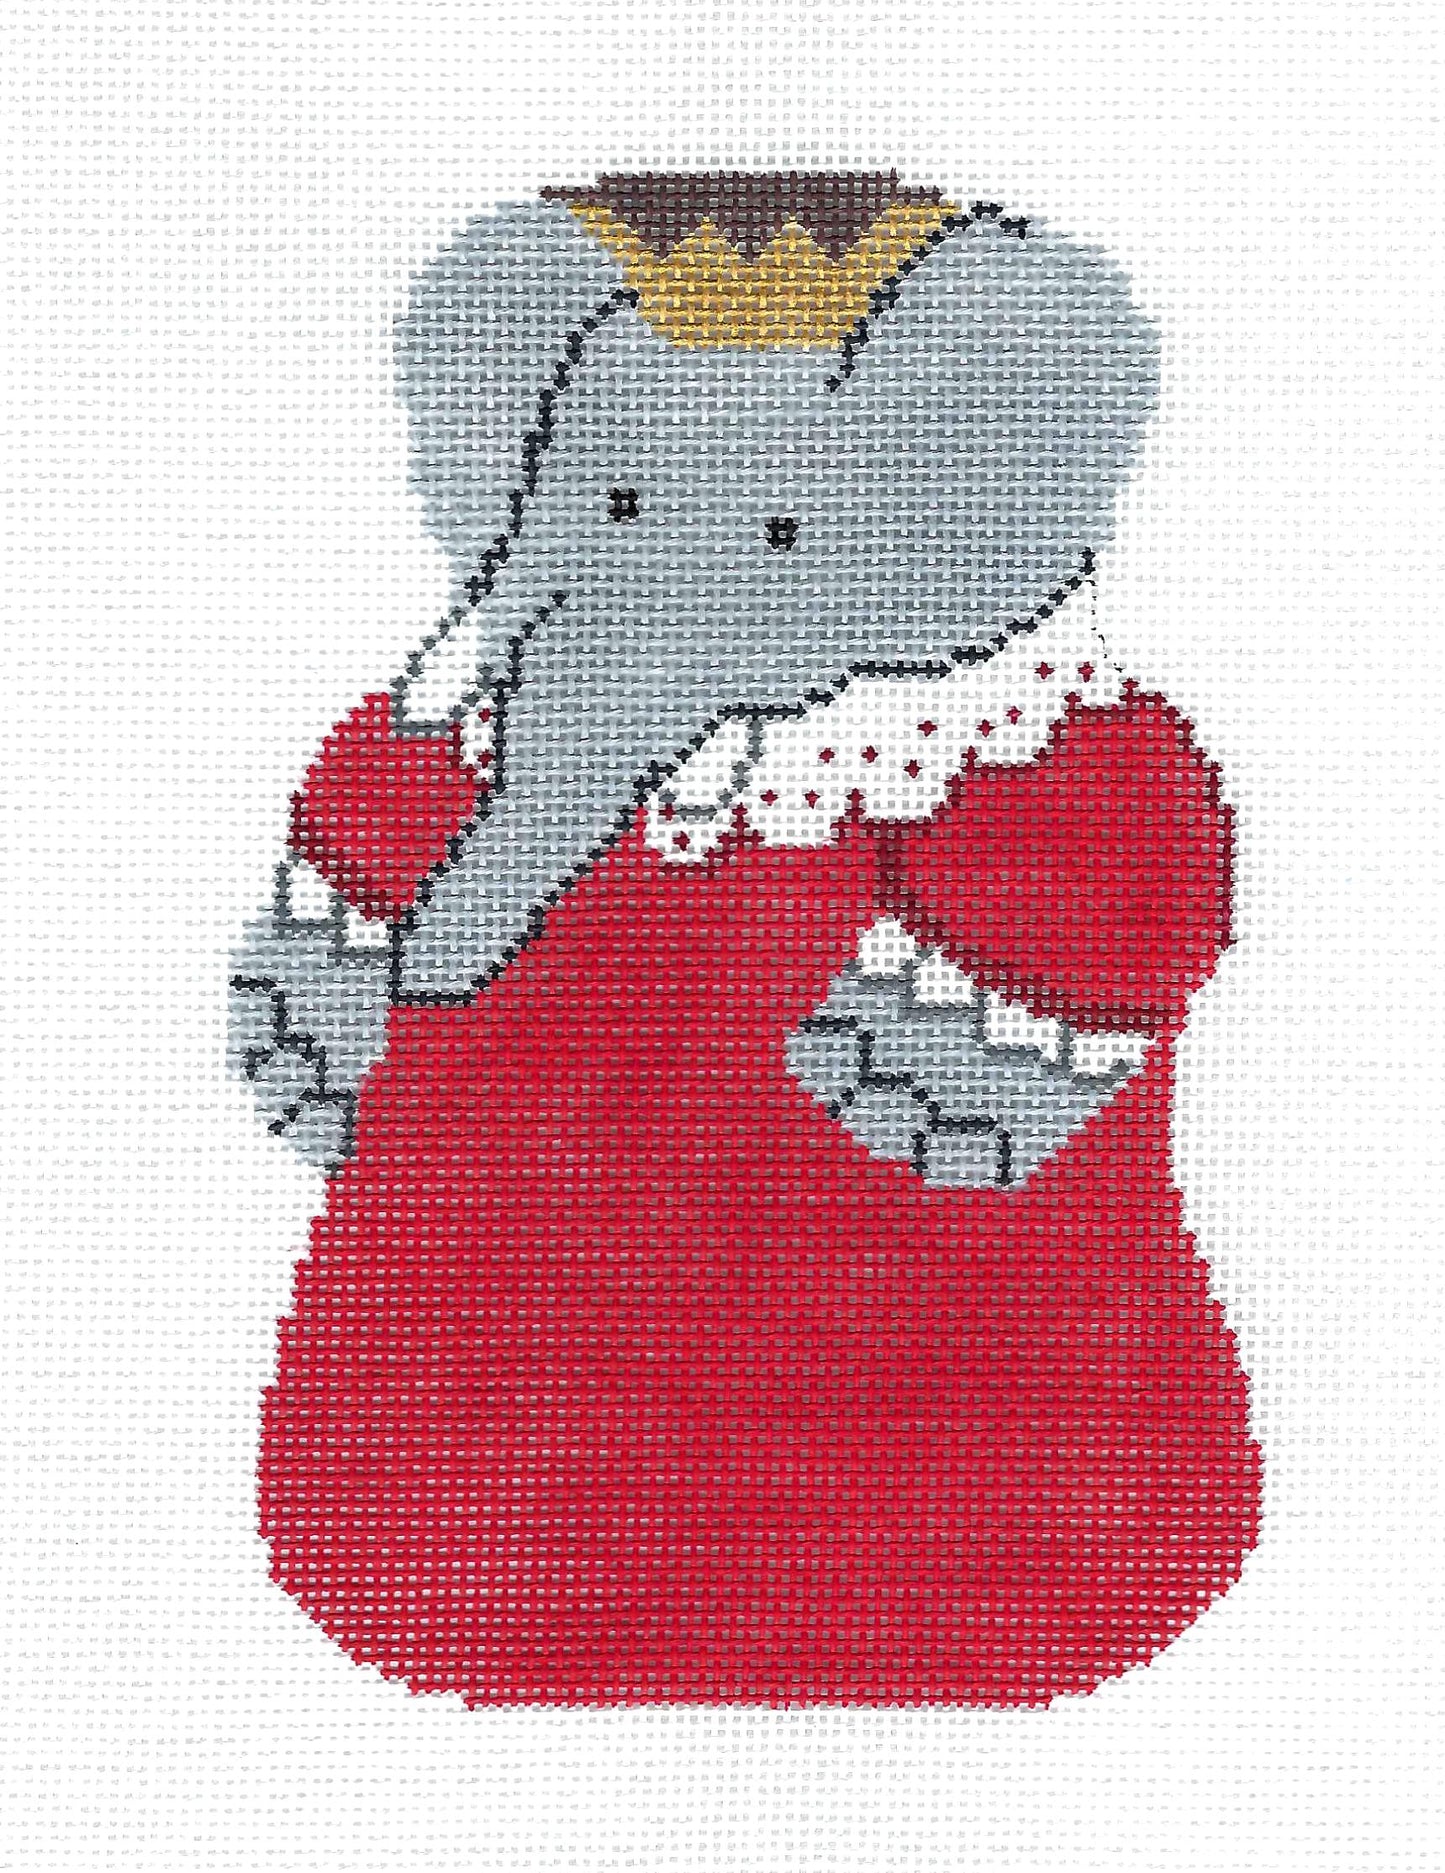 Child's ~ Celeste the Elephant 18 Mesh handpainted Needlepoint Canvas Ornament by Silver Needle